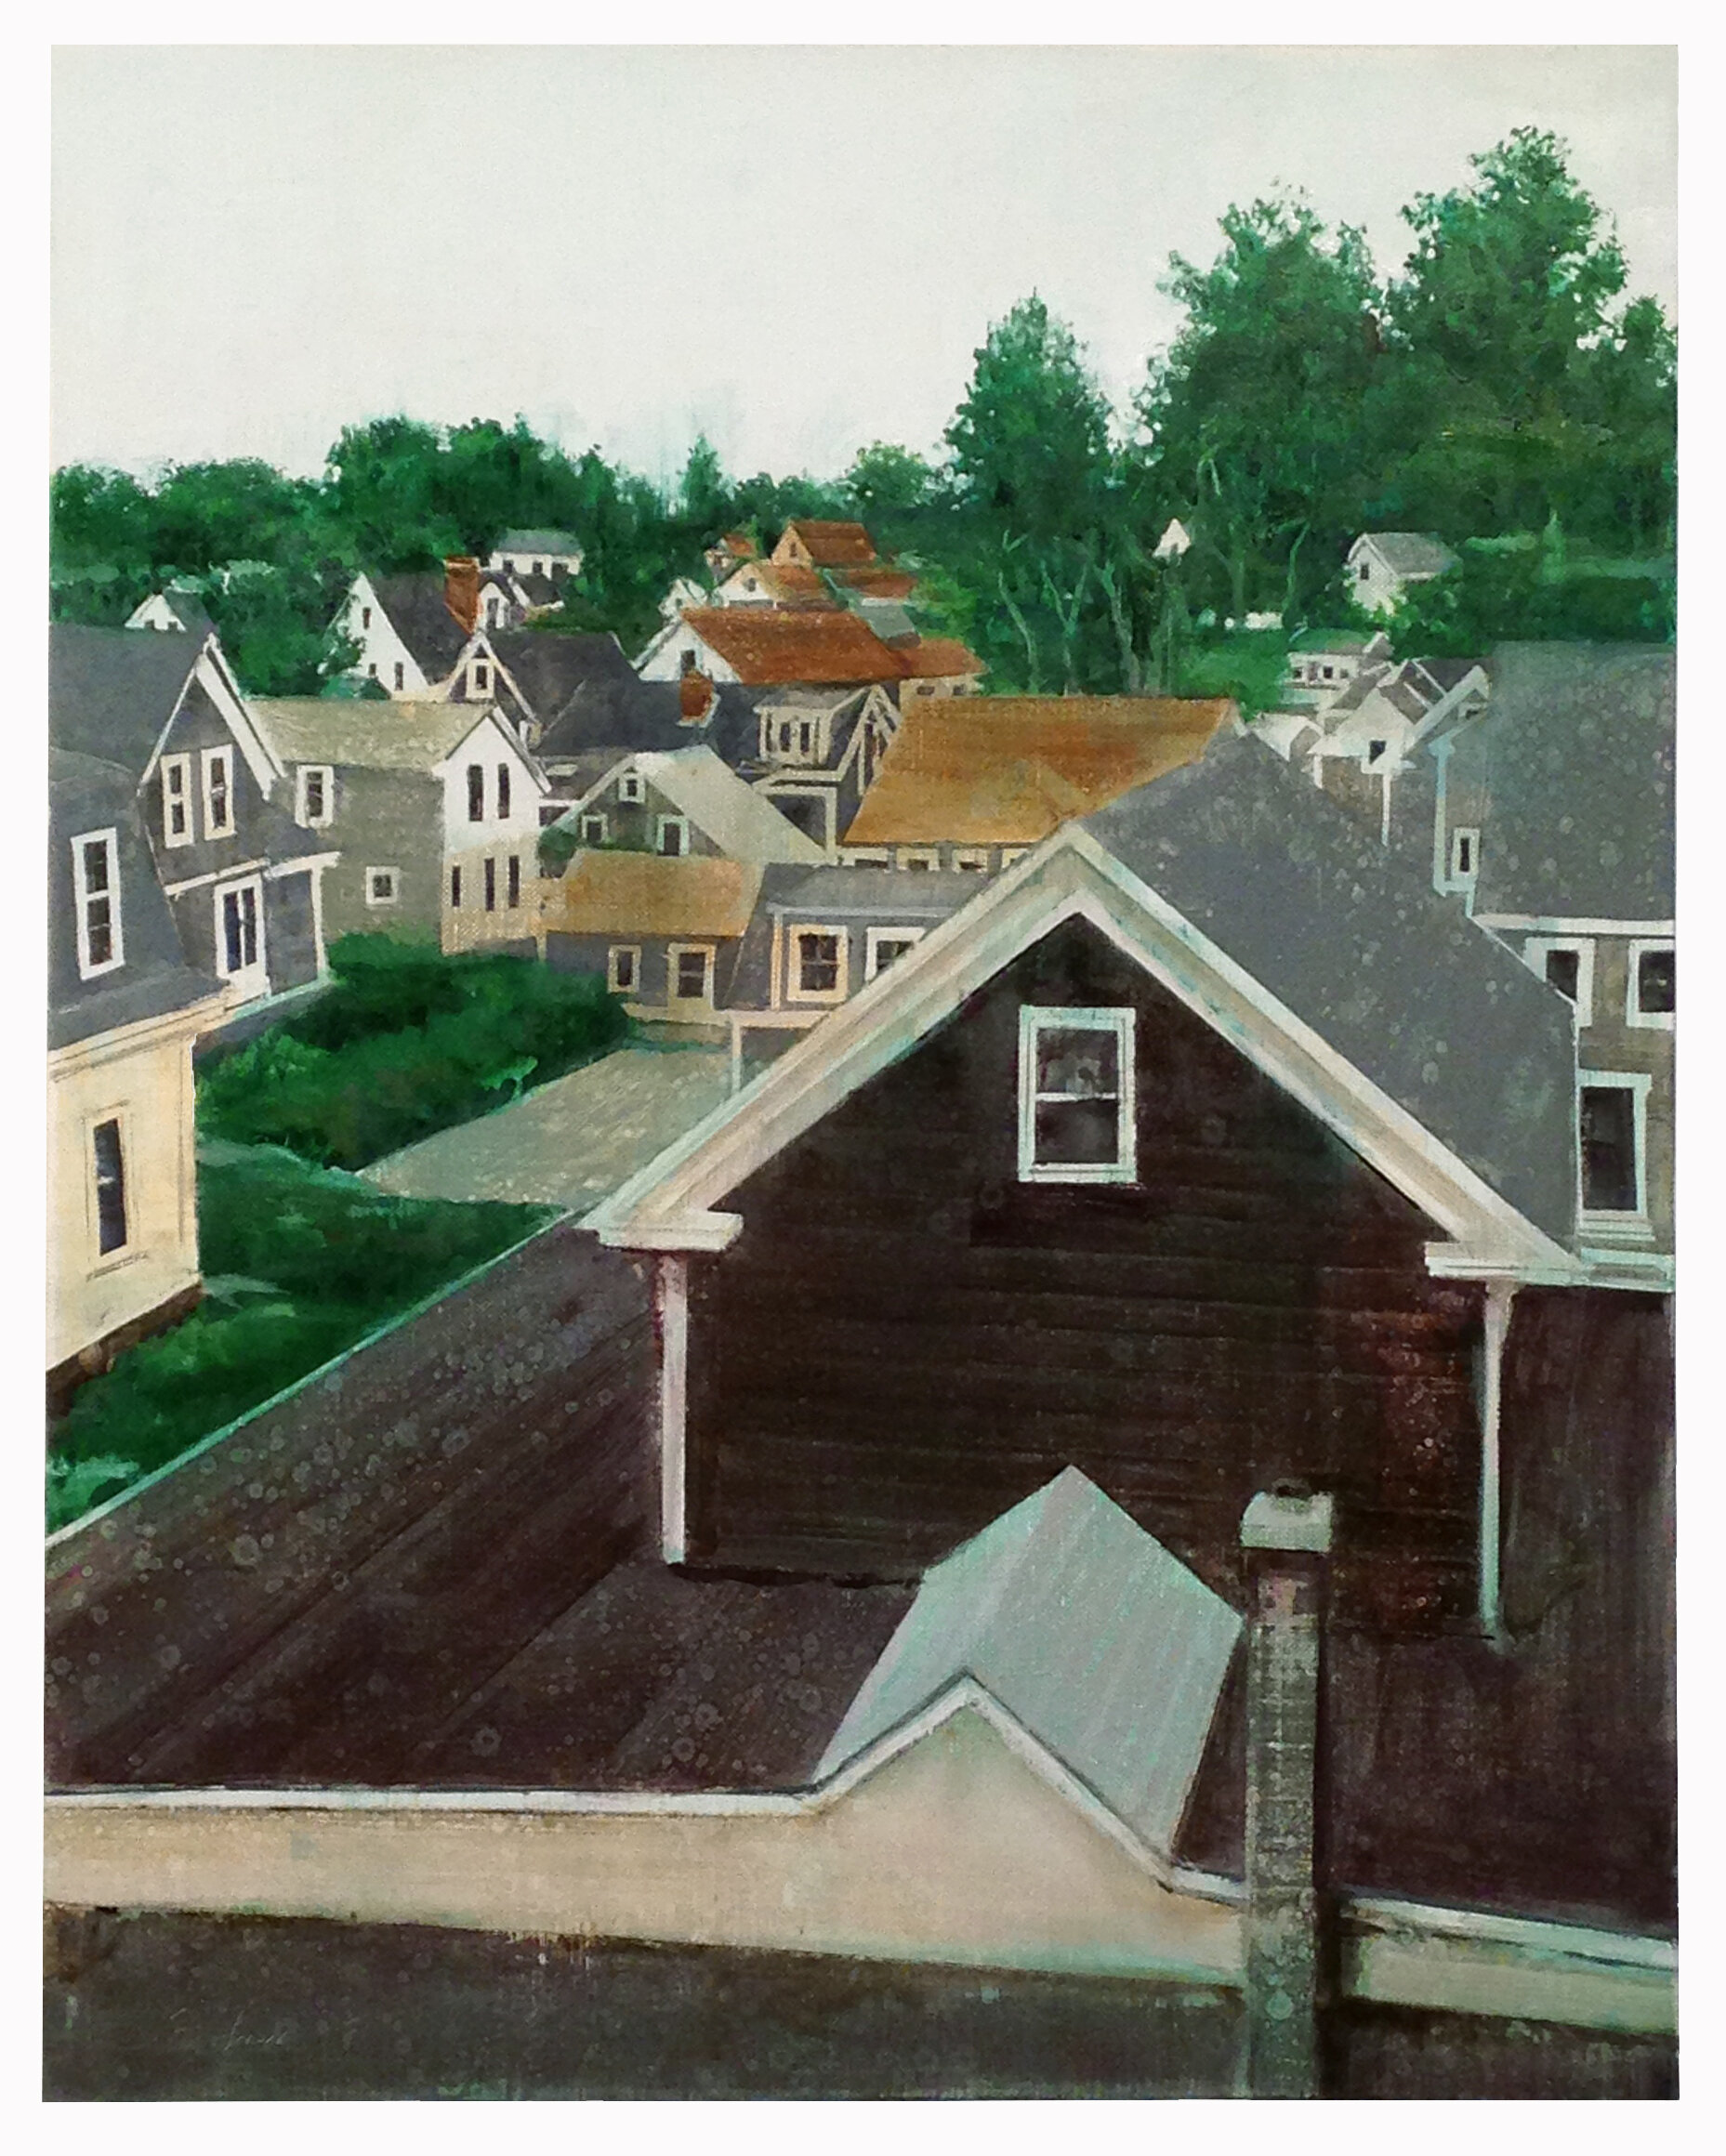  Provincetown Rooftops 2 24 x 19 inches Oil on linen 2017 